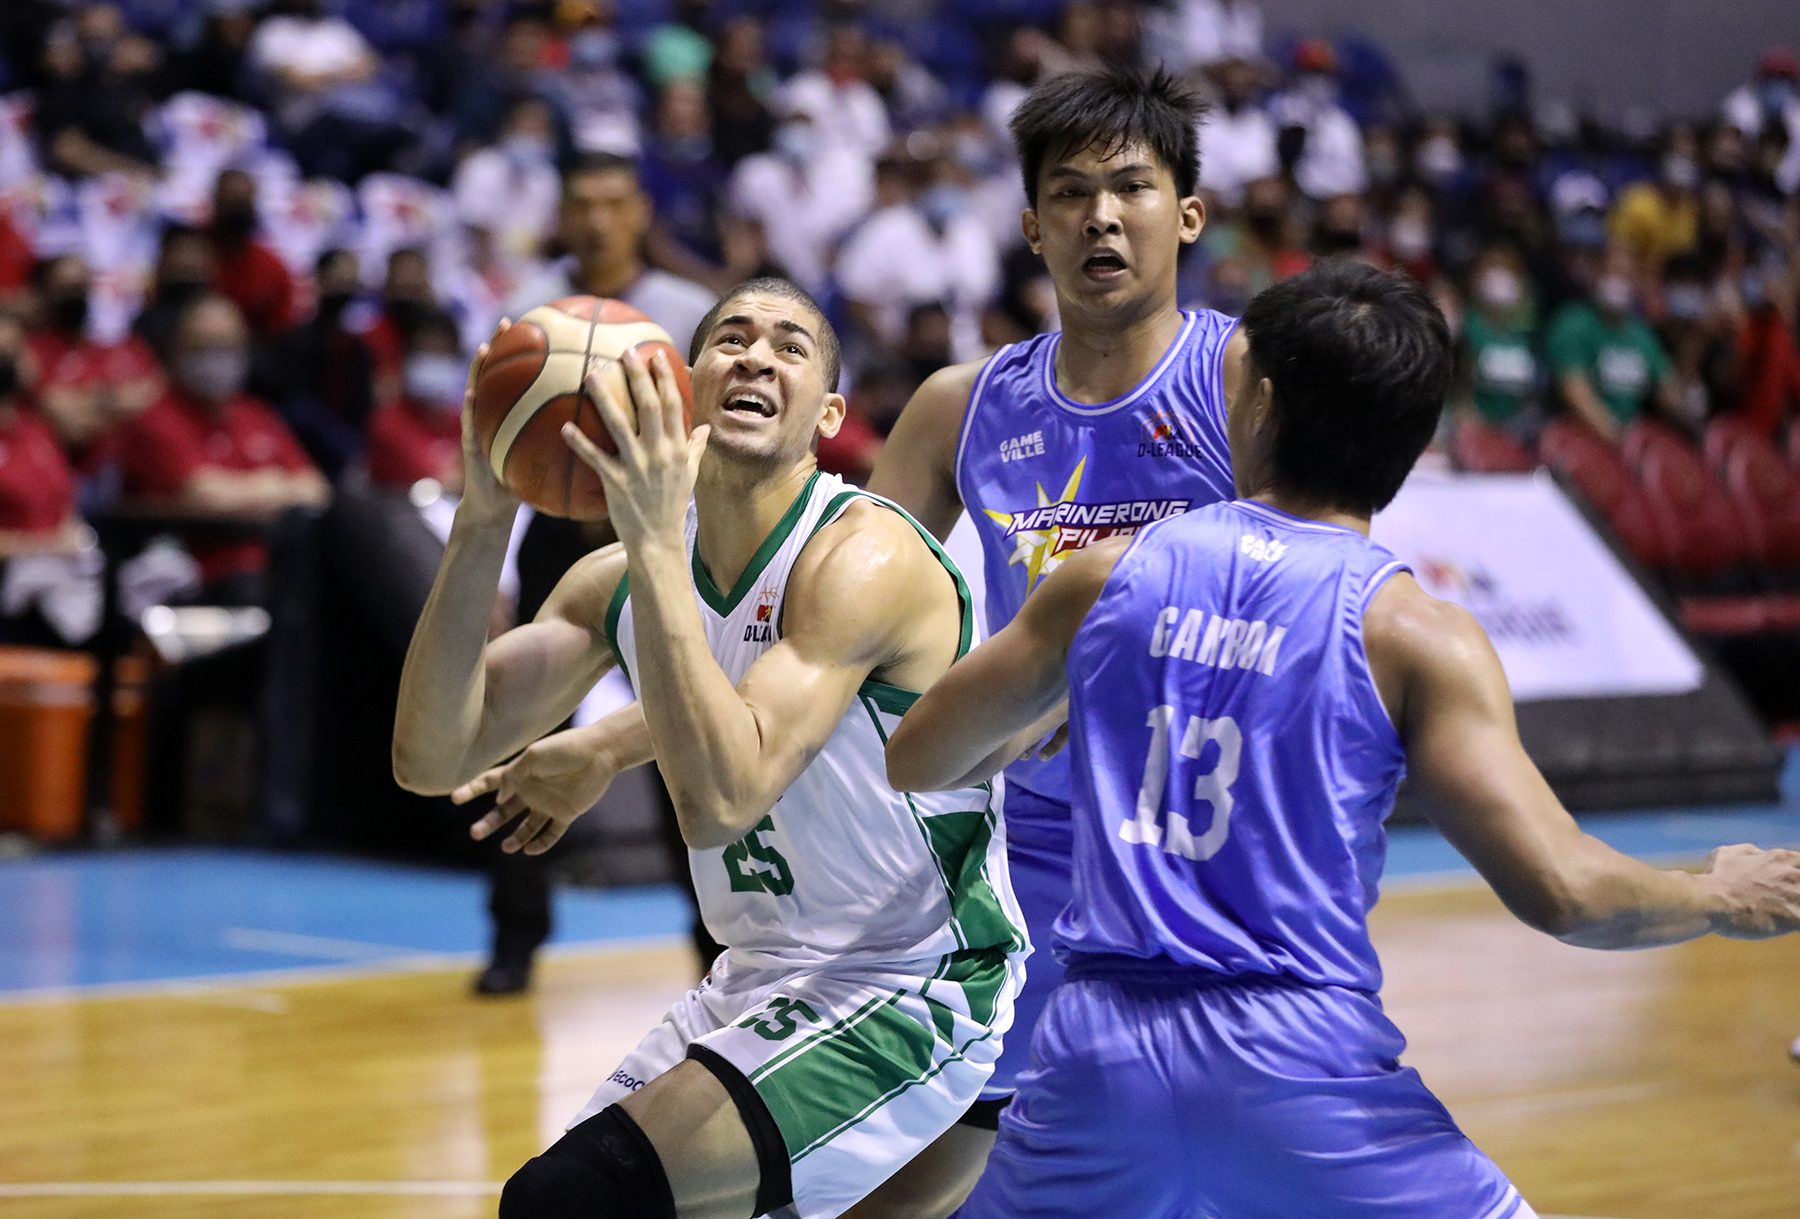 La Salle routs Marinerong Pilipino, claims D-League Aspirants’ Cup title